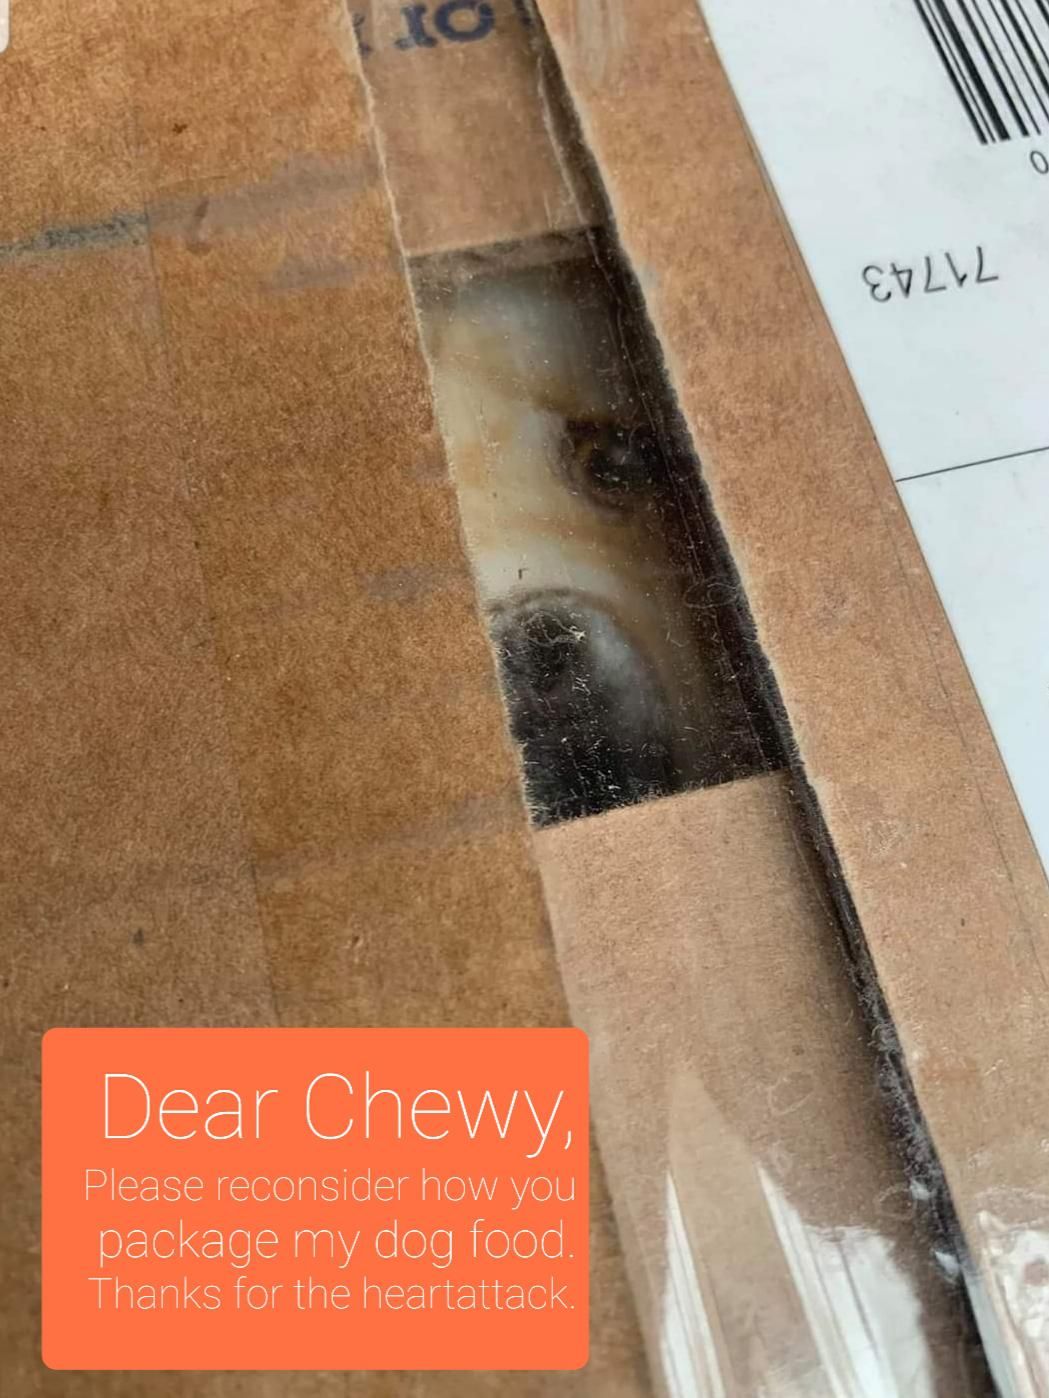 A quick note to Chewy...